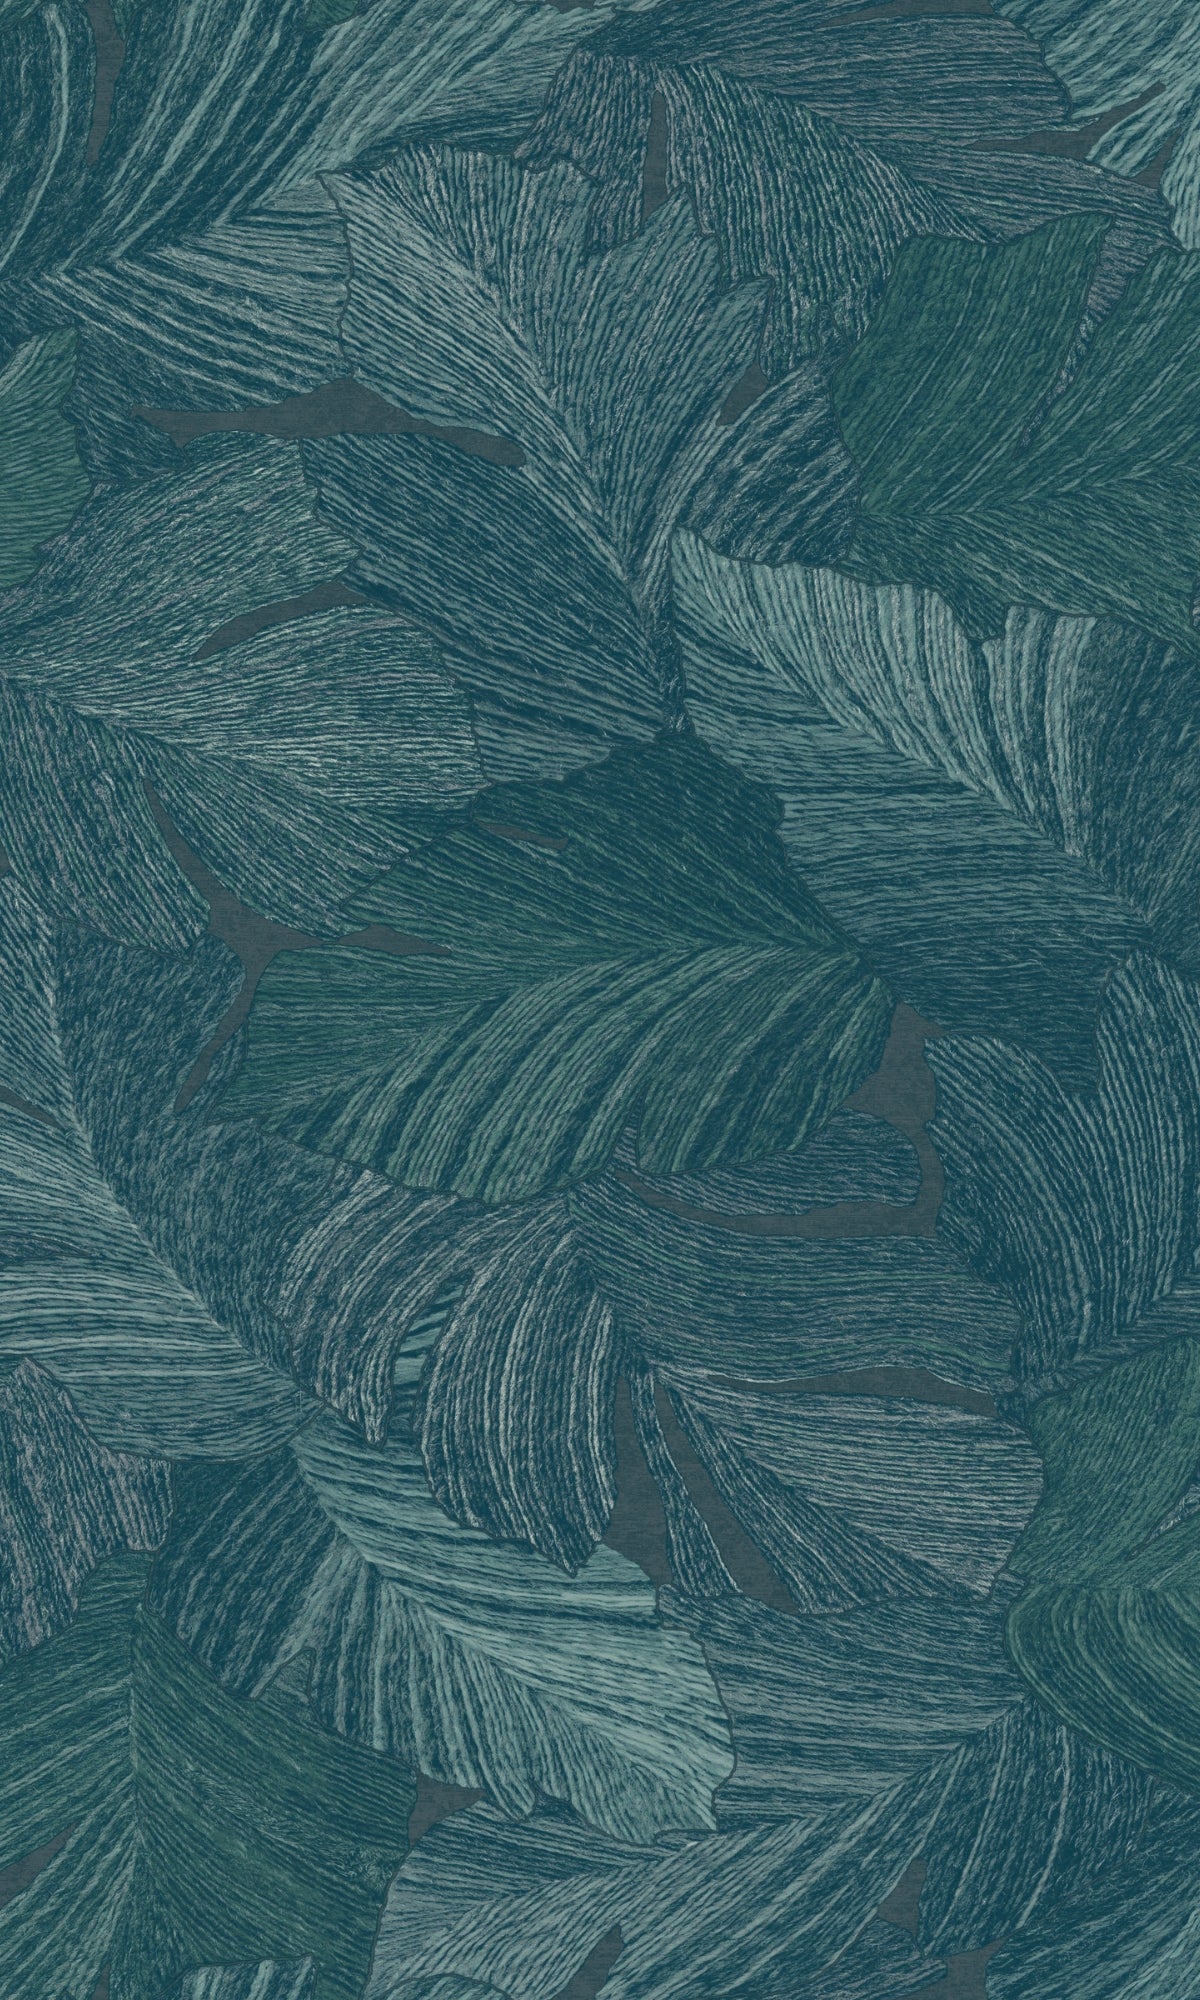 Blue Charming Leaves Tropical All Over Wallpaper R9351